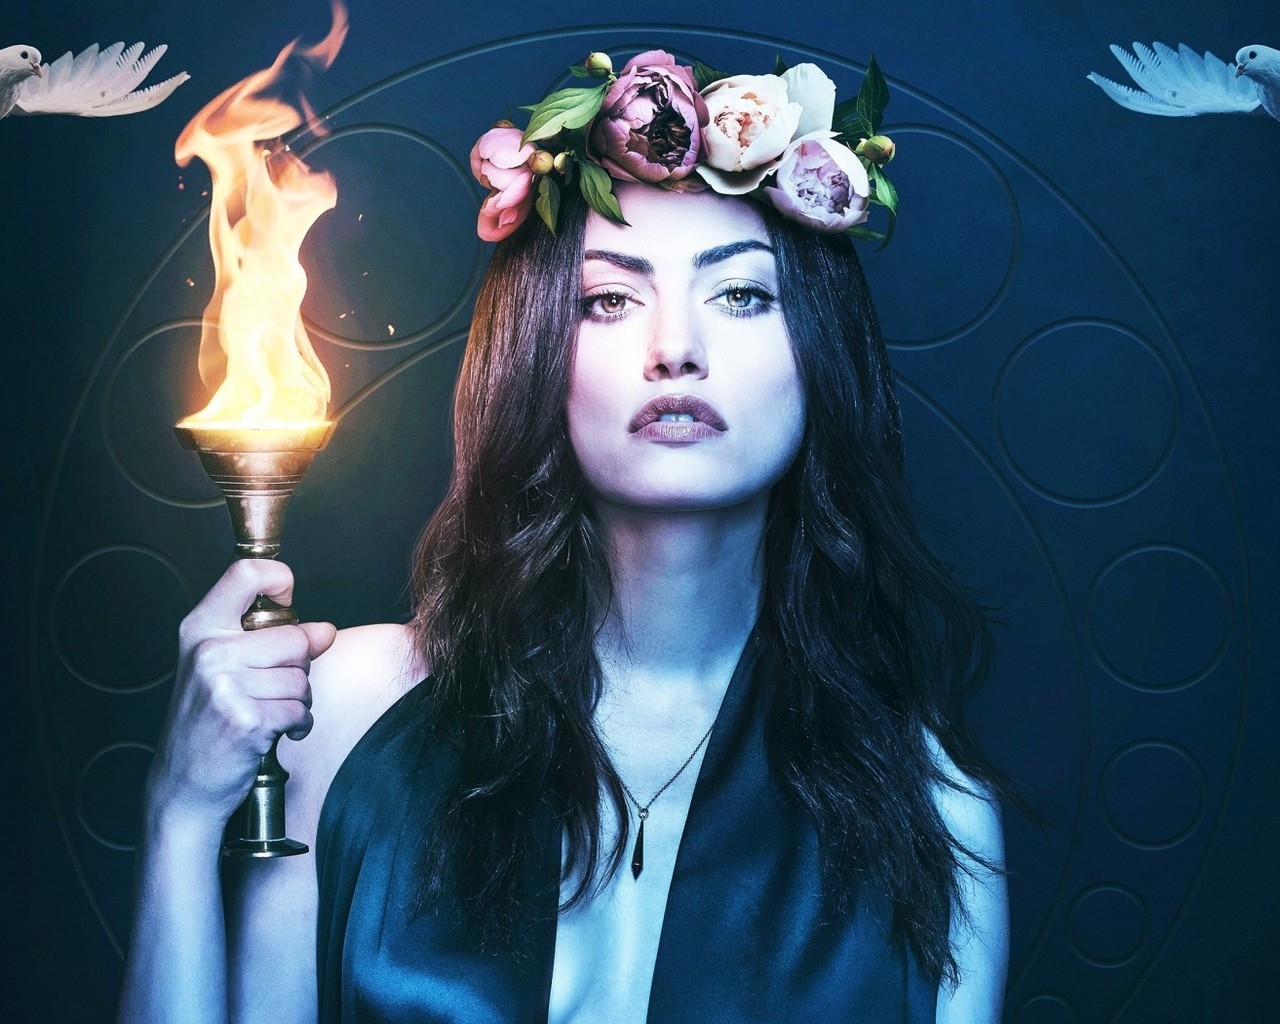 The Originals Phoebe Tonkin  for 1280 x 1024 resolution